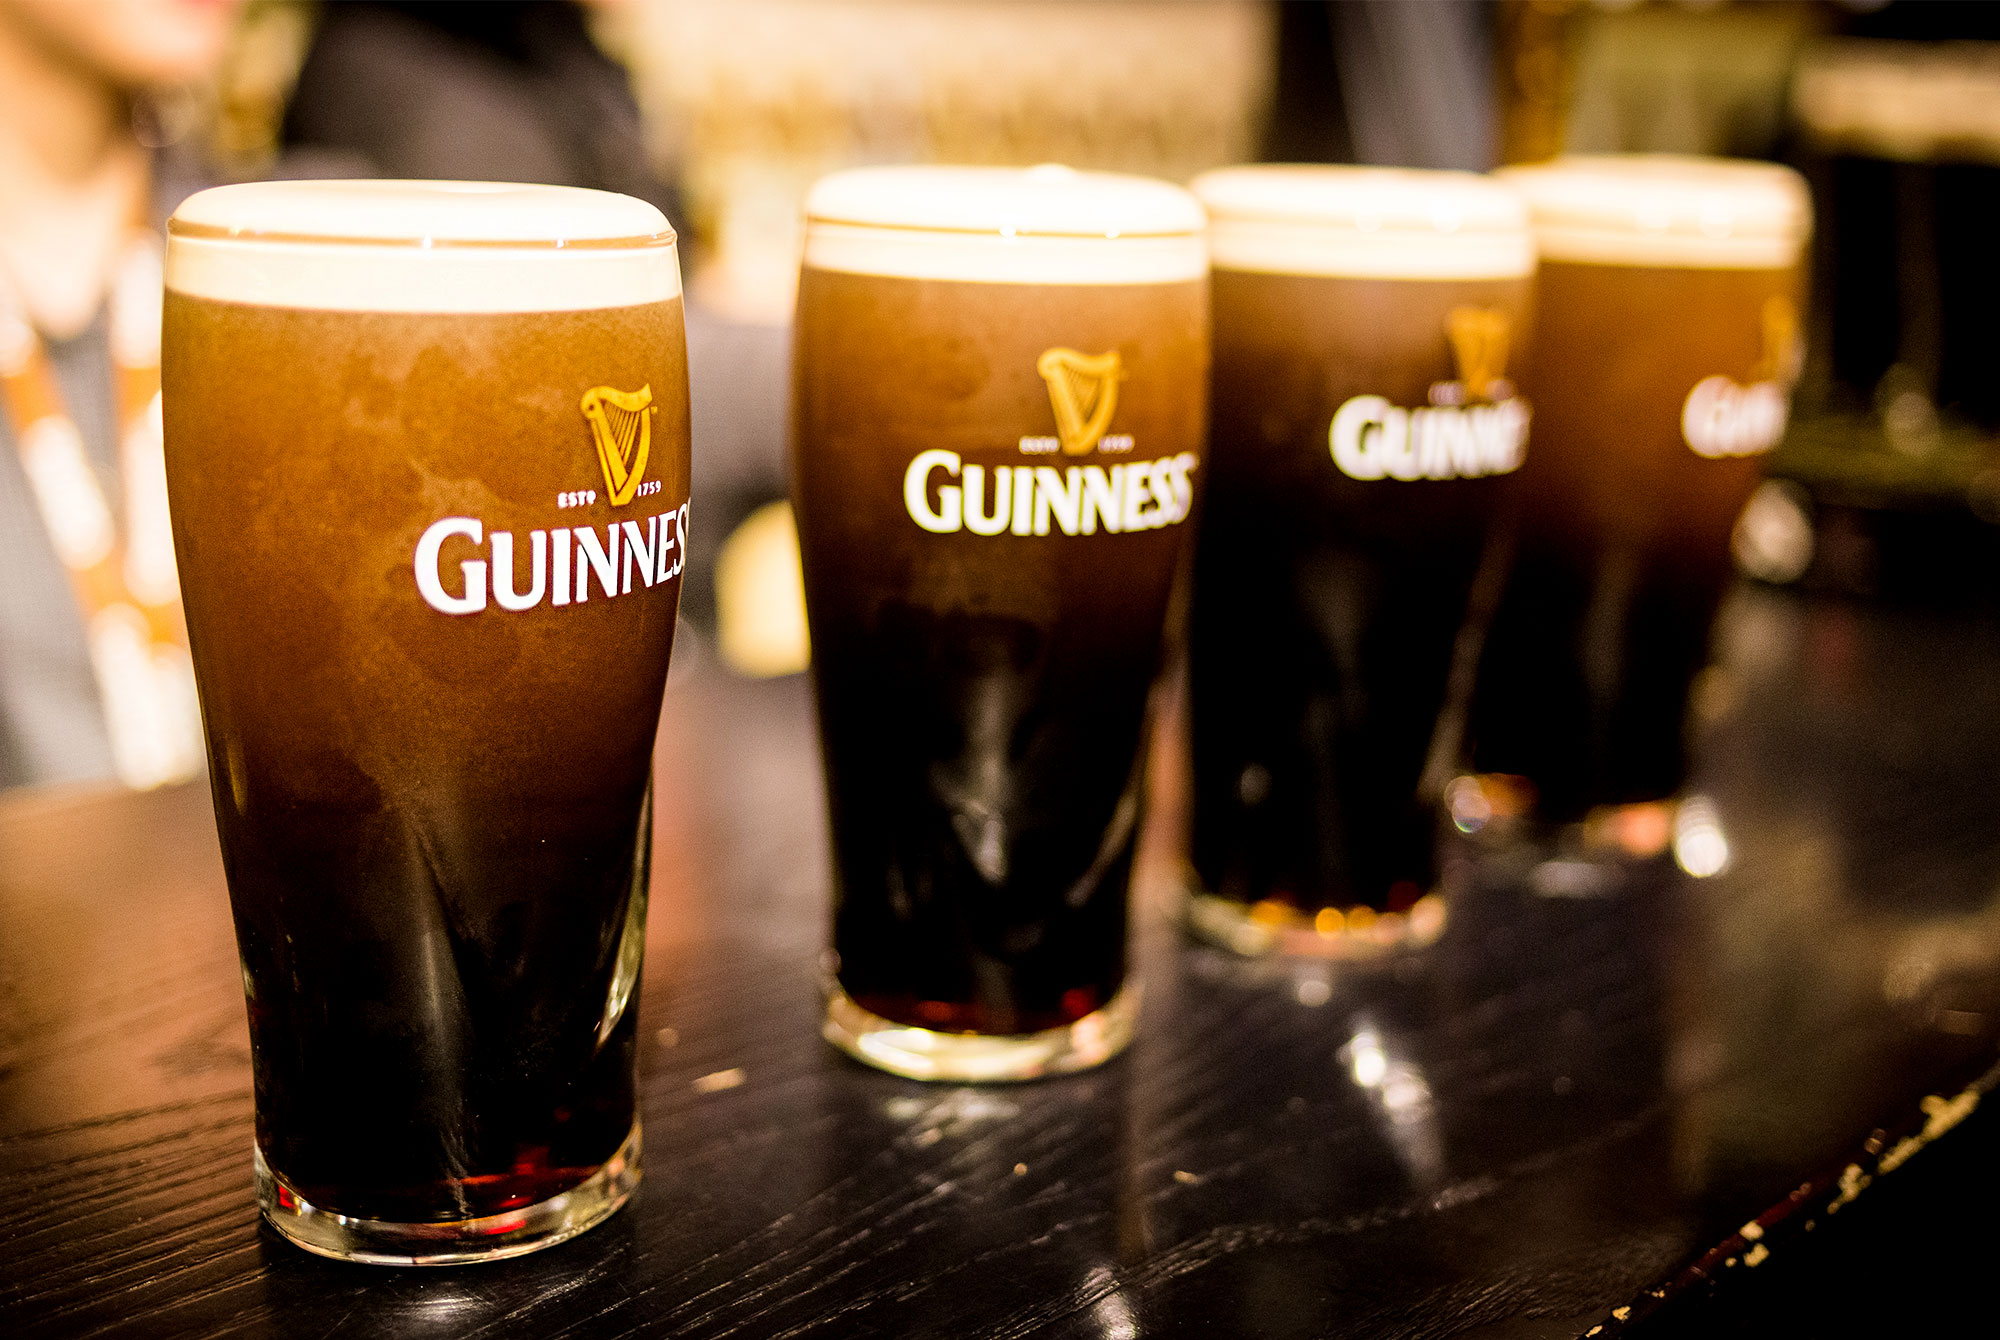 Guinness Goes Vegan-Friendly, Eliminates Fish Guts from Brewing Process